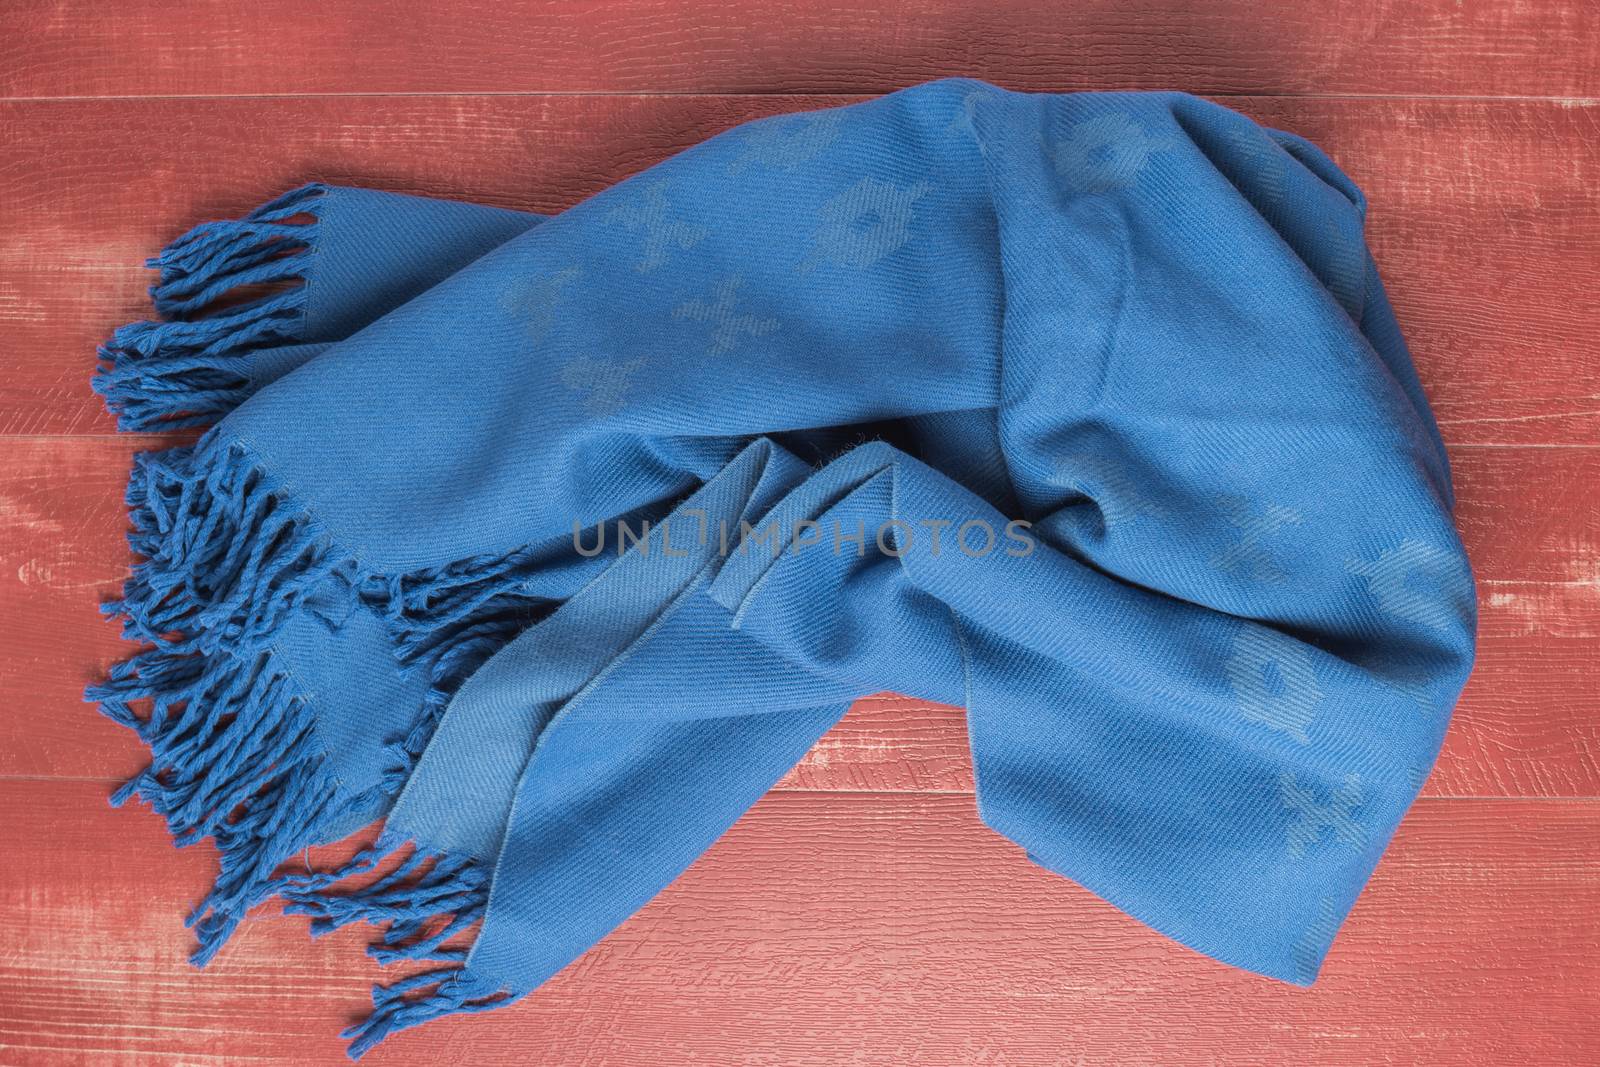 Woolen soft and worm scarf by AnaMarques